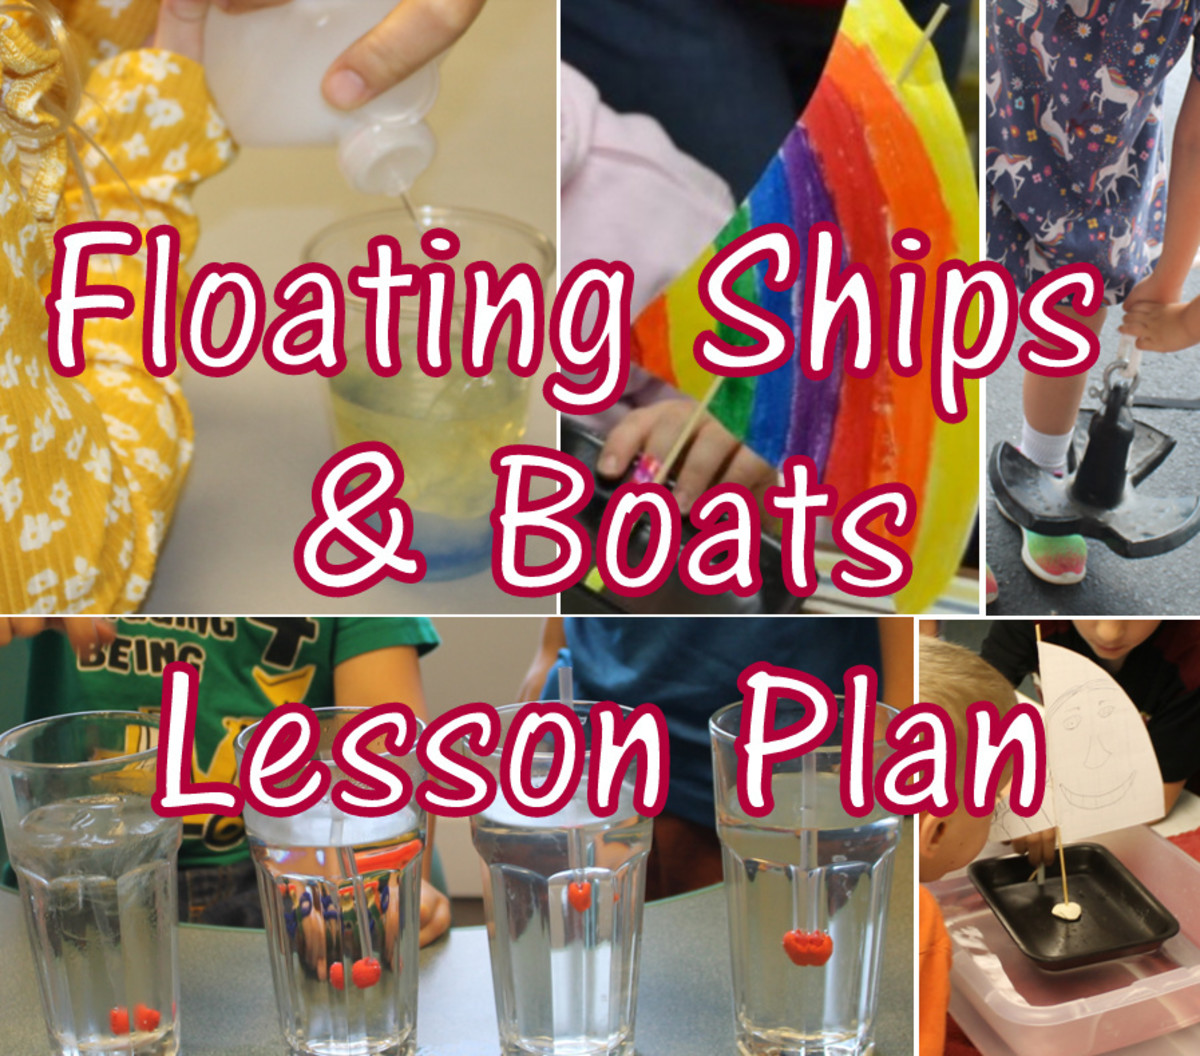 Floating Ships and Boats Hands-on STEM Lesson Plan